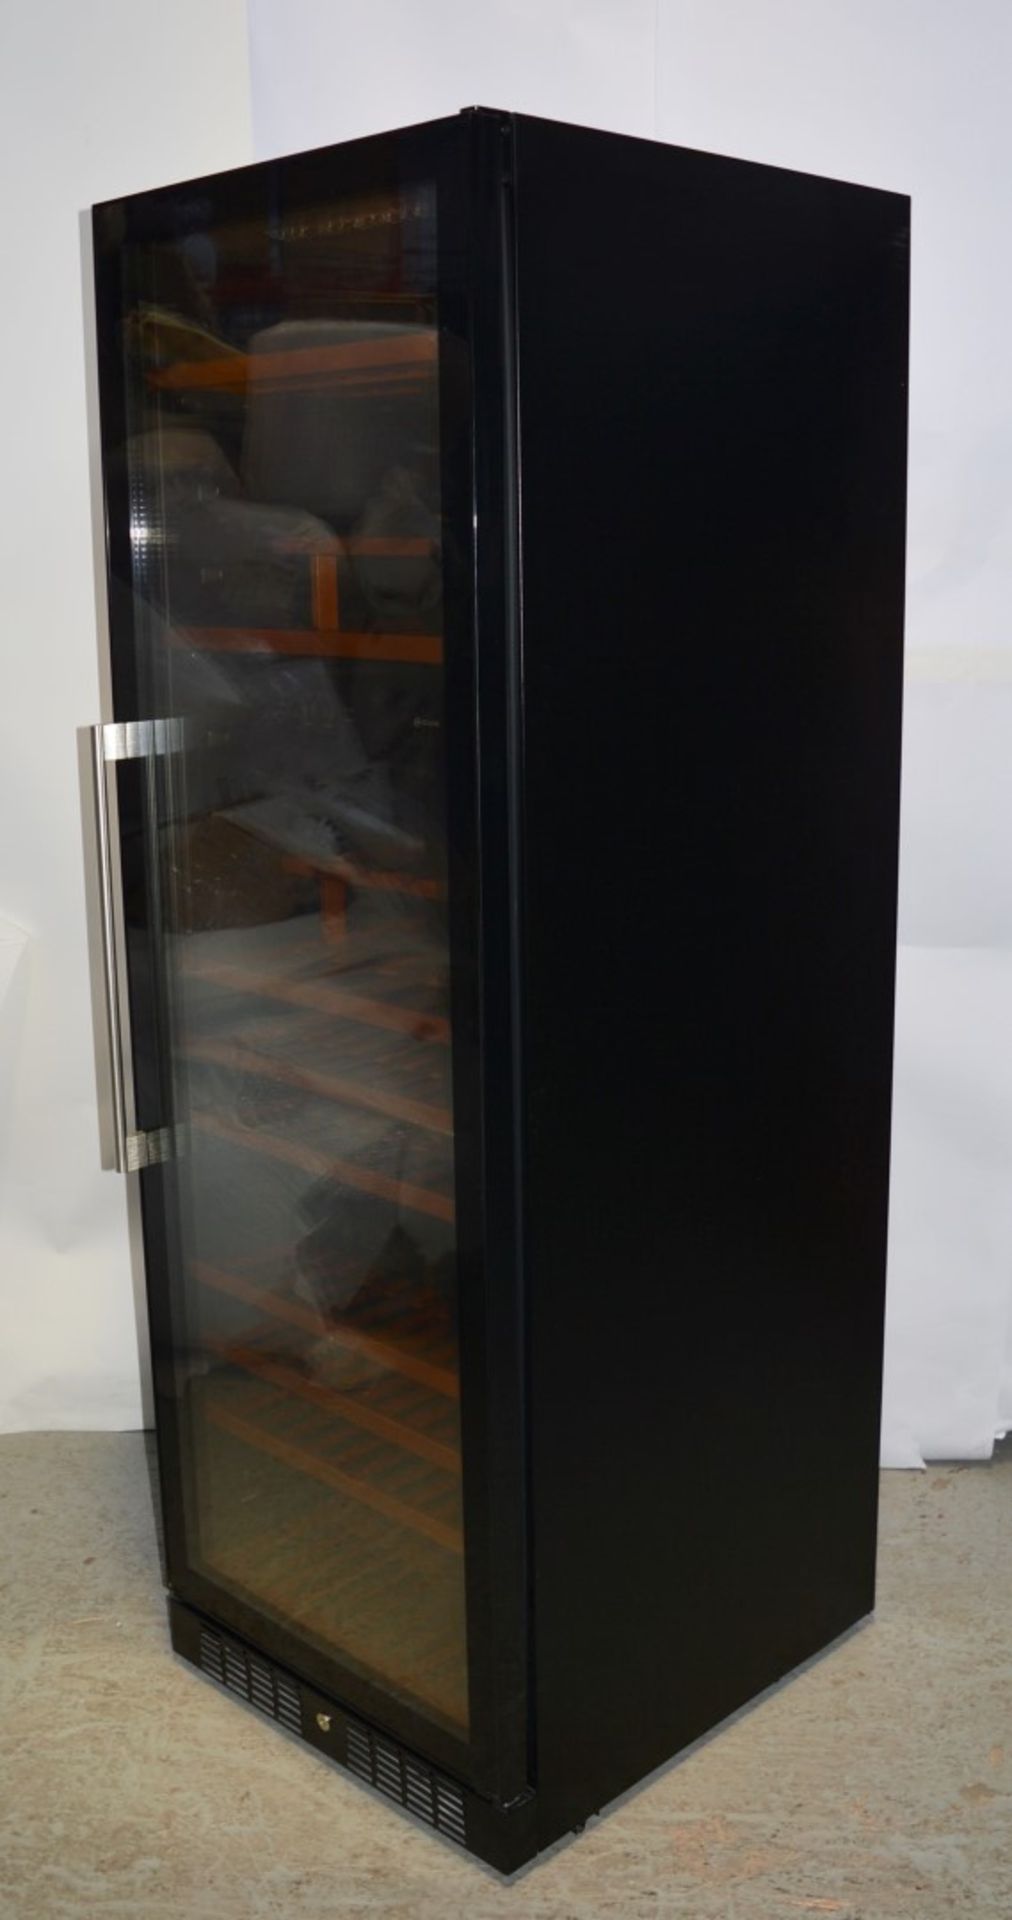 1 x Caple Freestanding Wine Chiller Cabinet - Model WF1547 - Height 176cm - Features Black Glass - Image 17 of 18